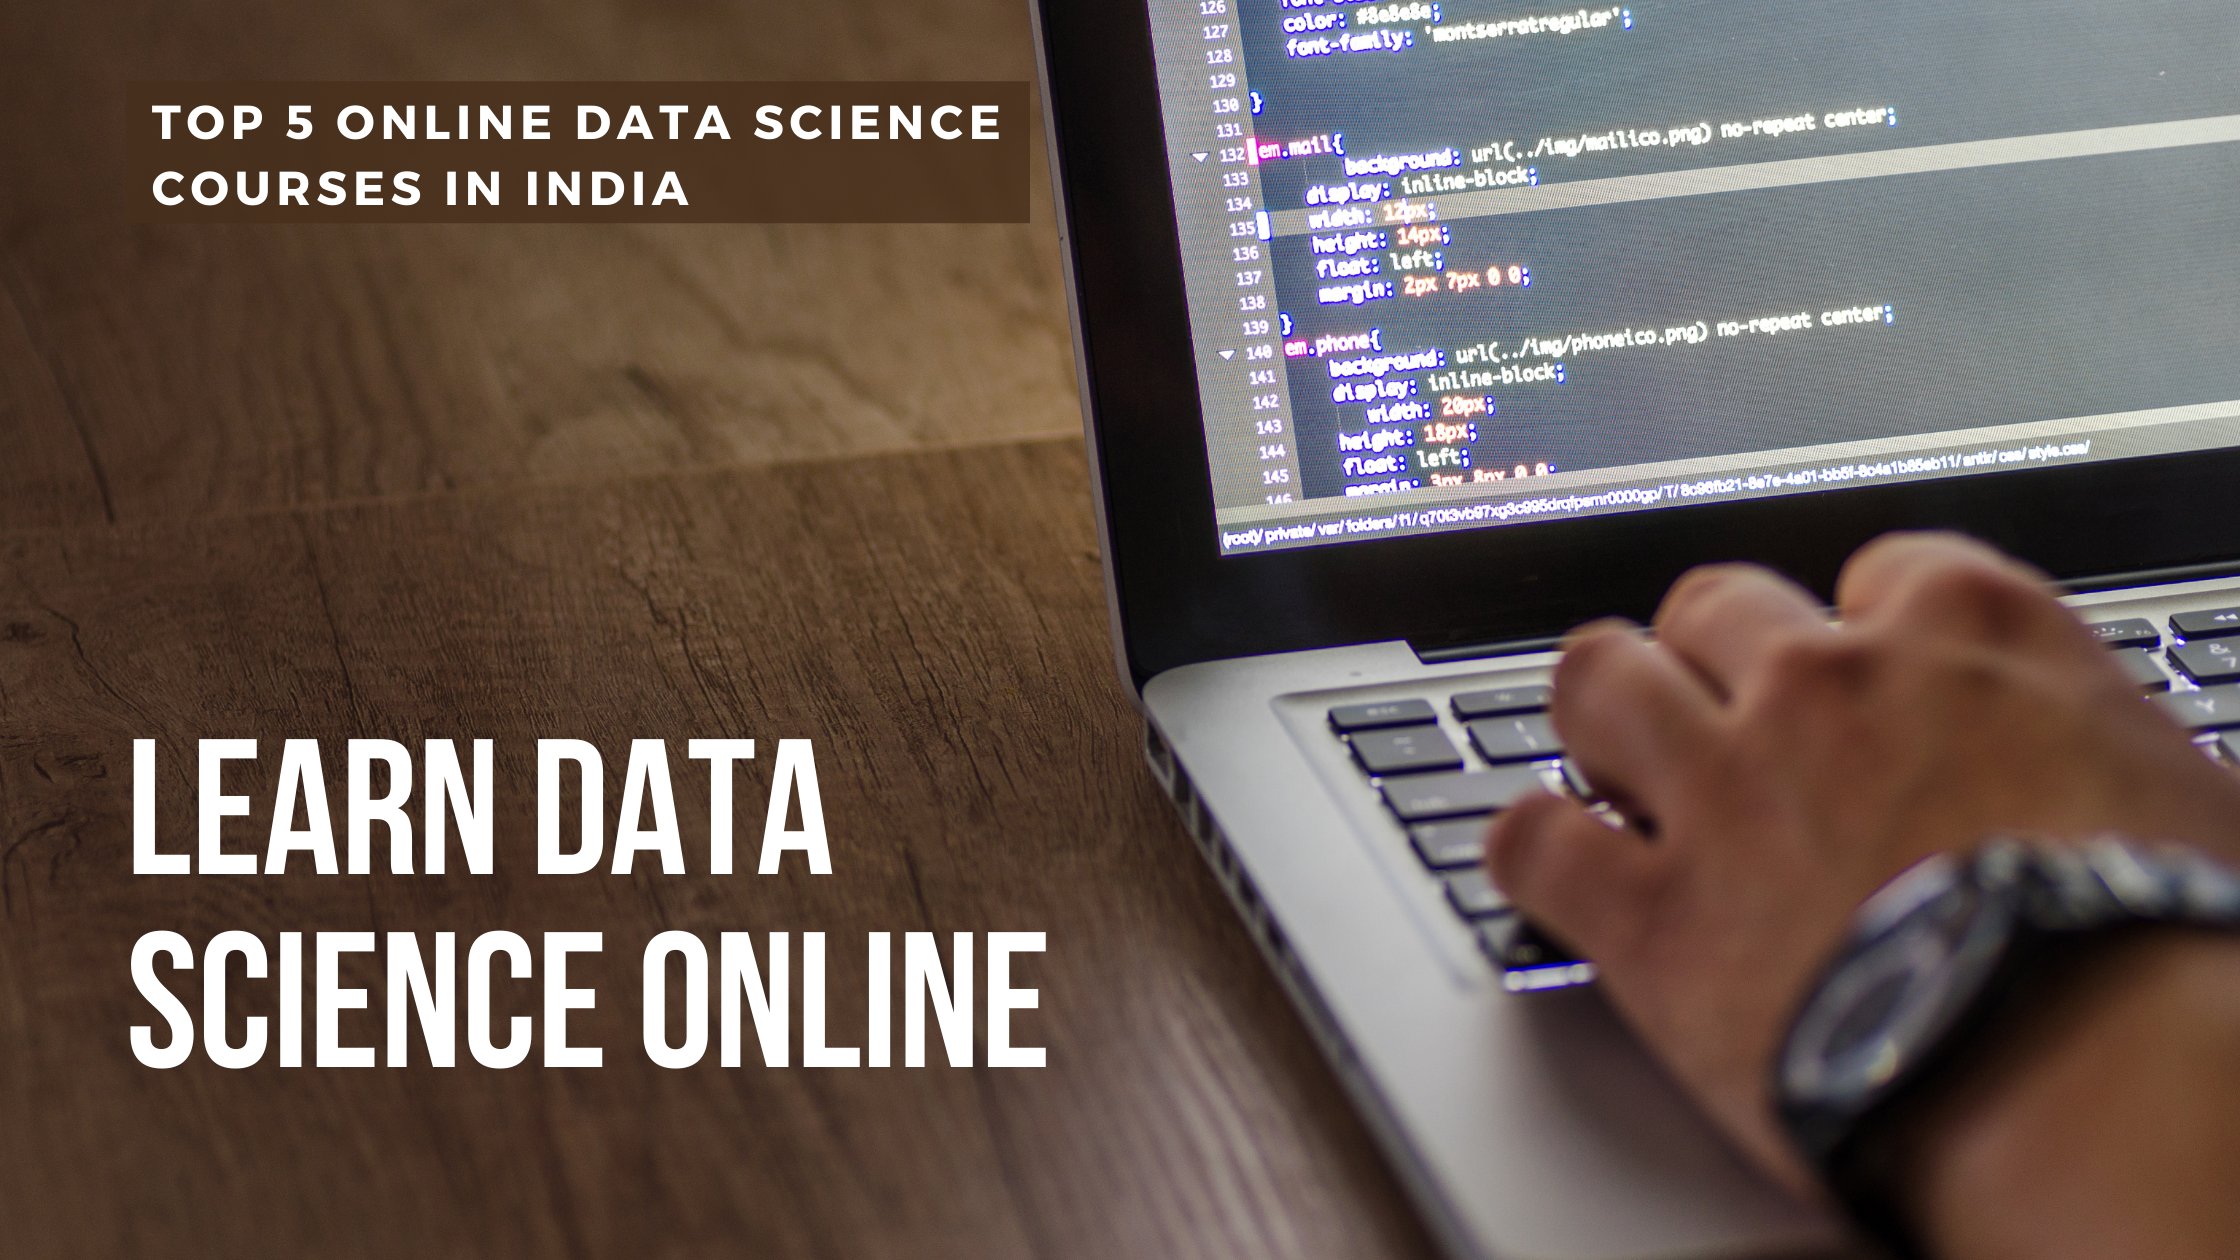 Top 5 Online Data Science Courses In India